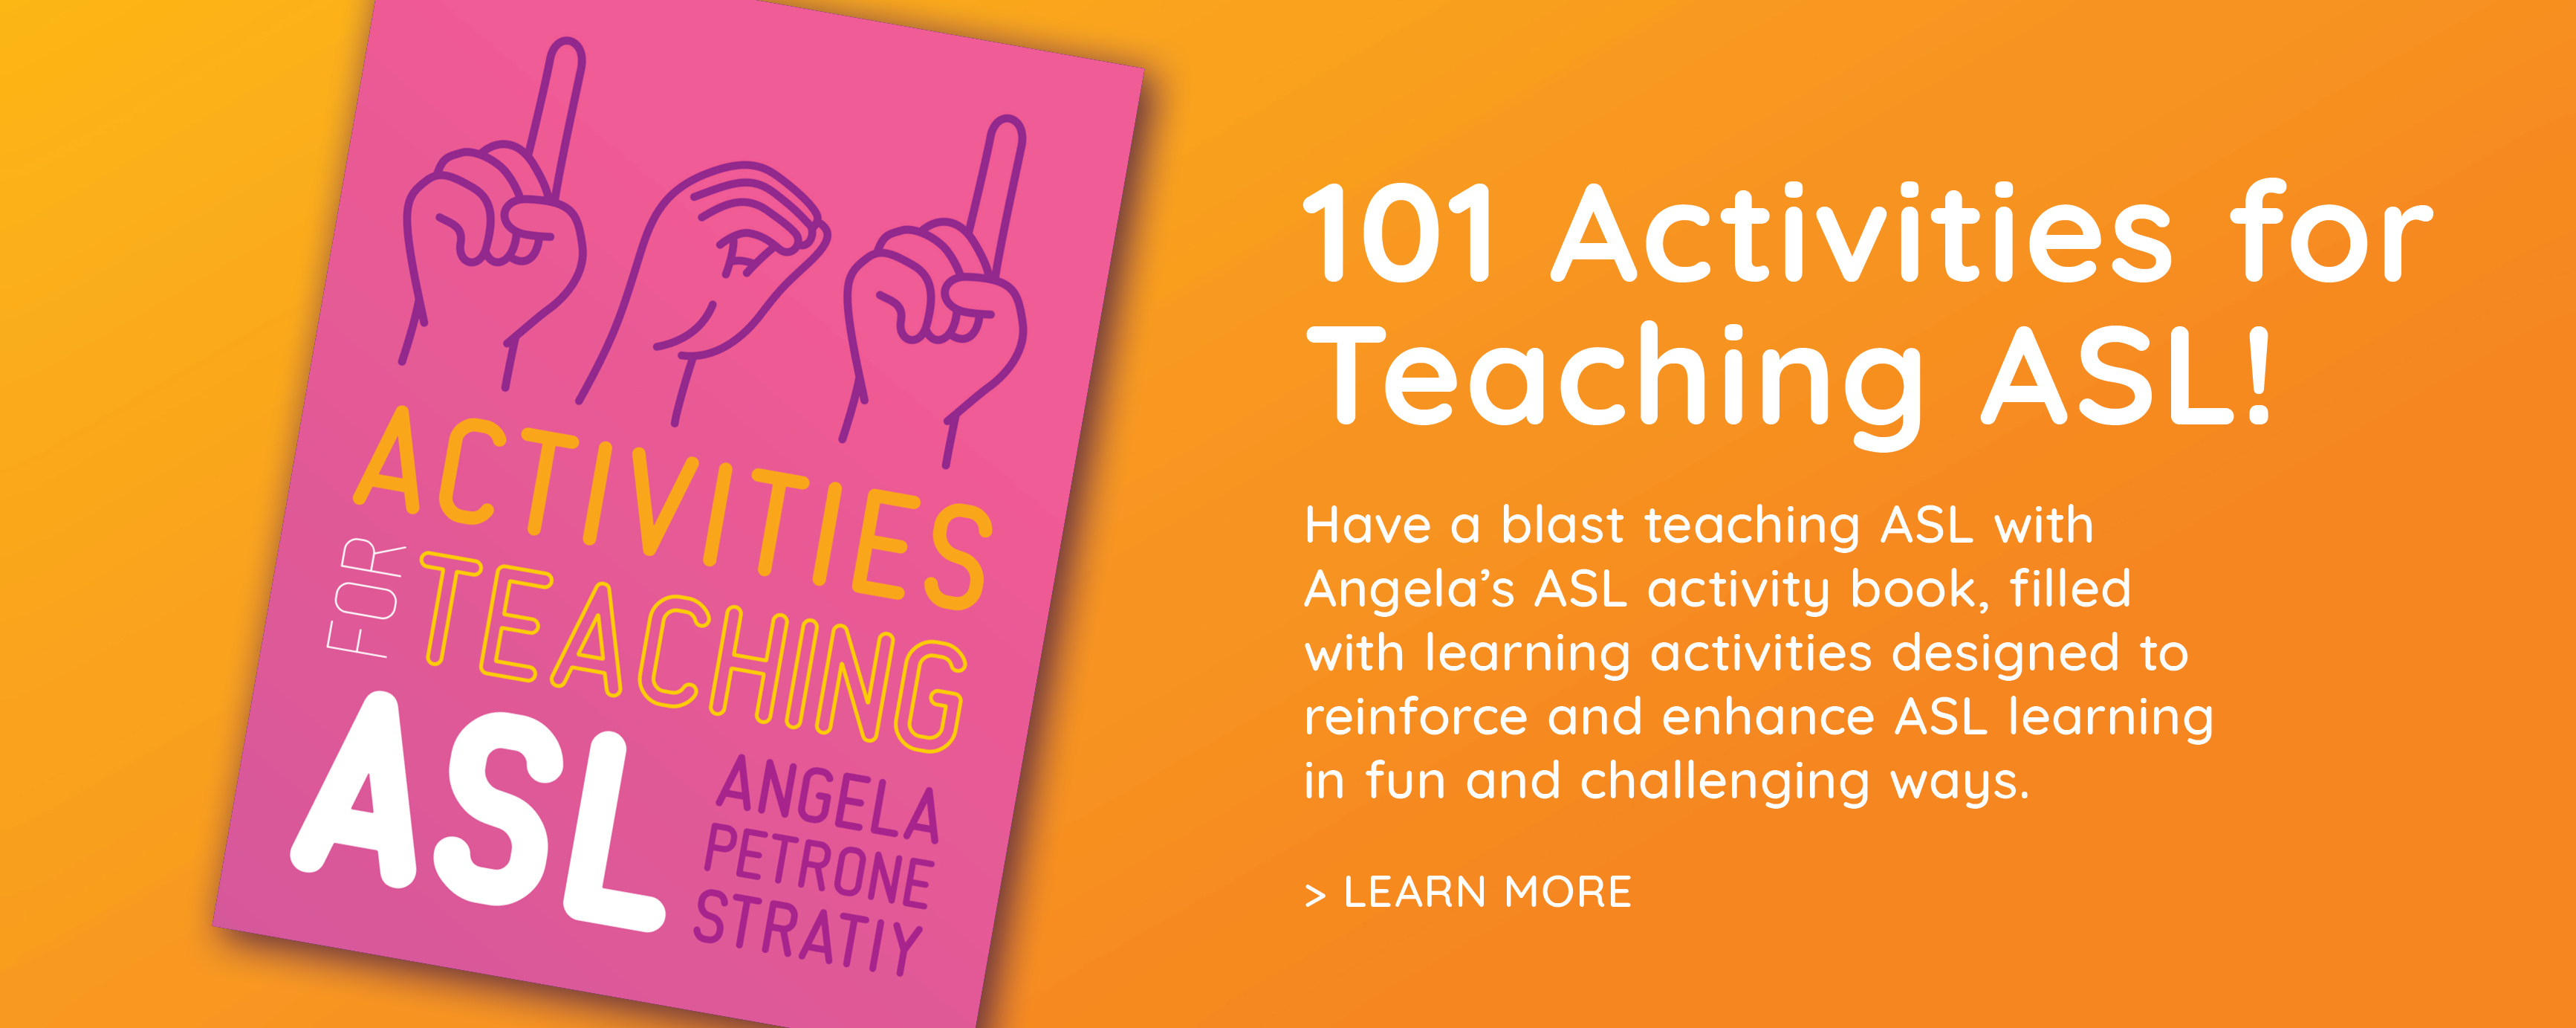 101 Activities for Teaching ASL!